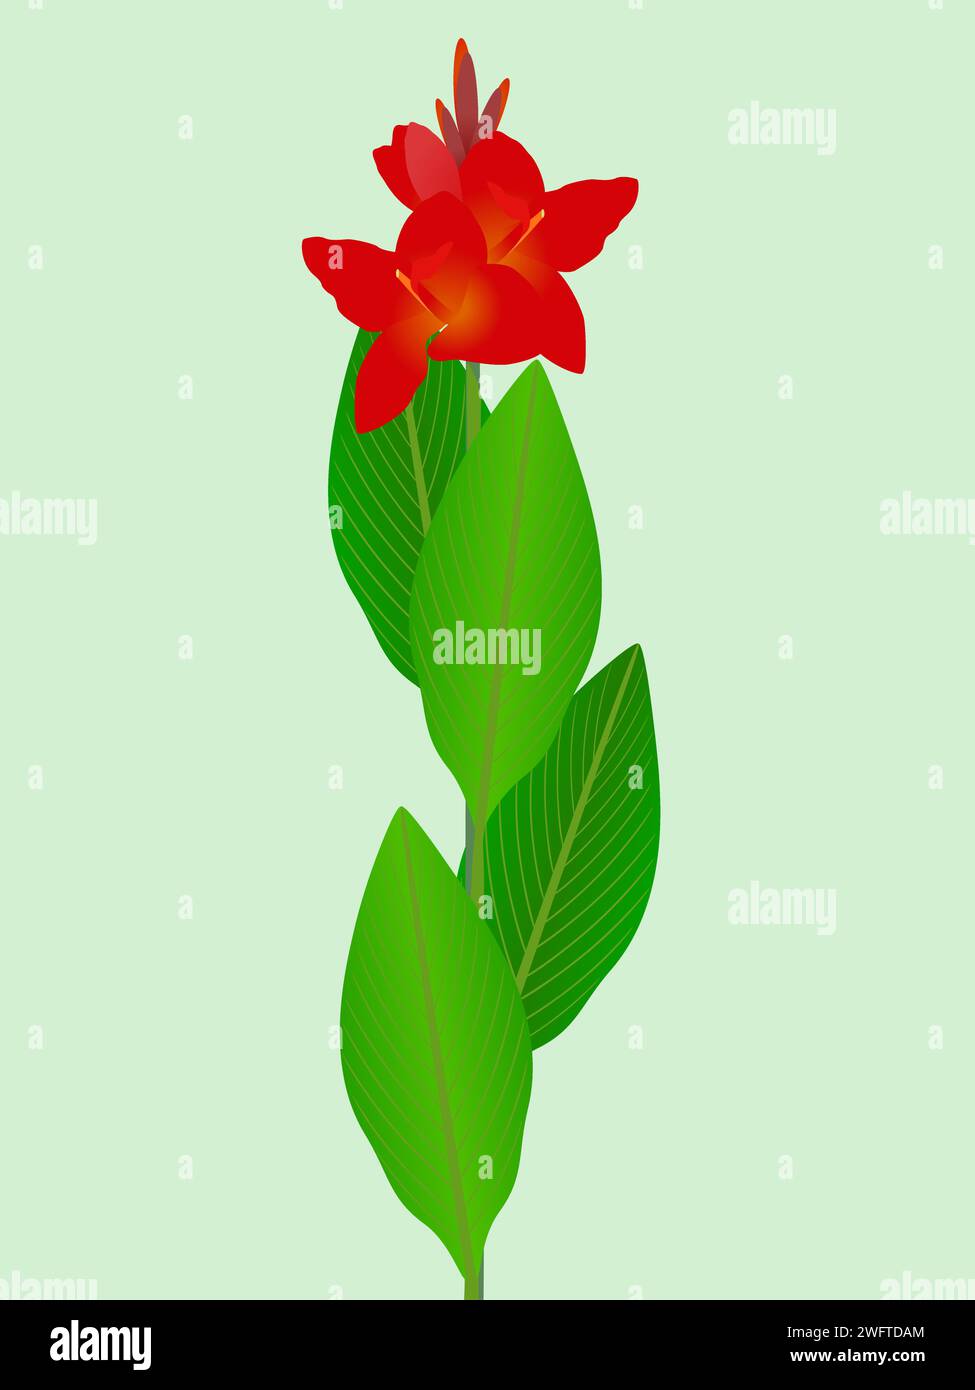 Red cannas with leaves on a green background. Stock Vector